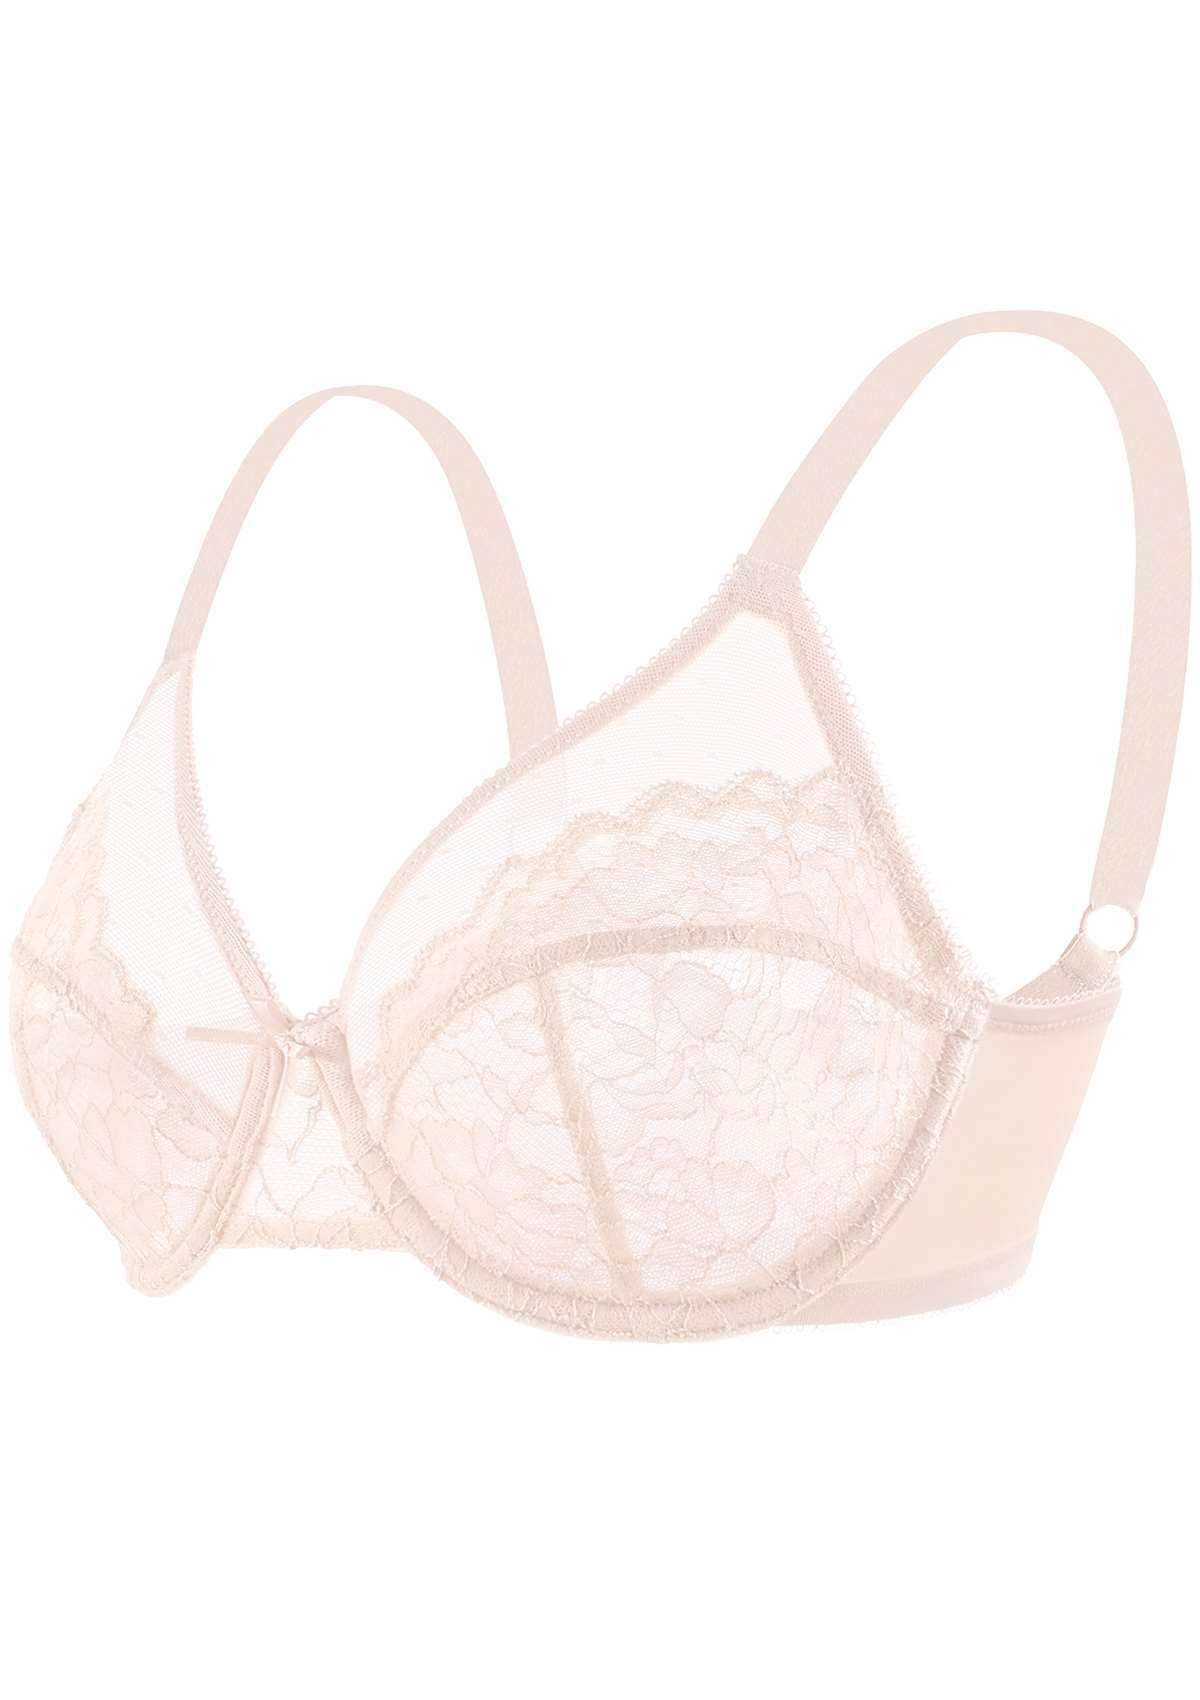 HSIA Enchante Lacy Bra: Comfy Sheer Lace Bra With Lift - Pink / 46 / D